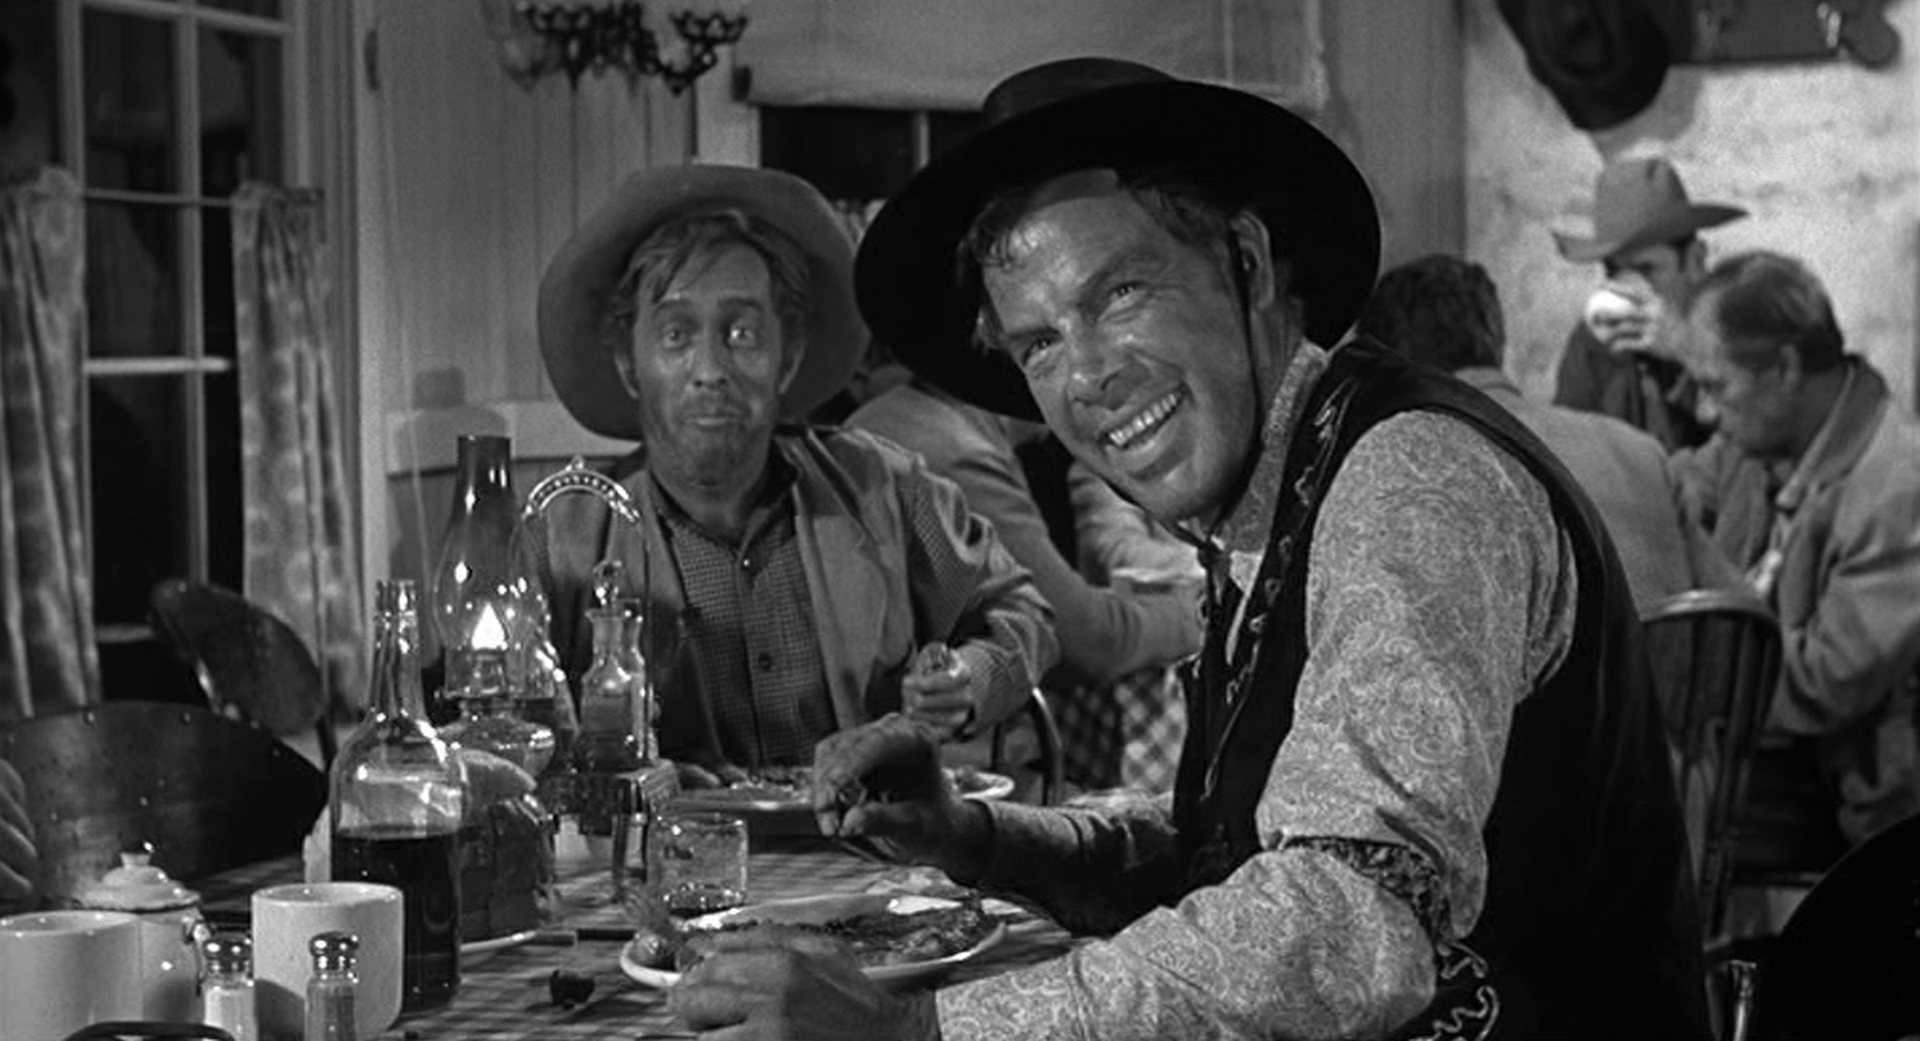 The grinning visage of Liberty Valance, played by Lee Marvin, at a diner’s dining table.